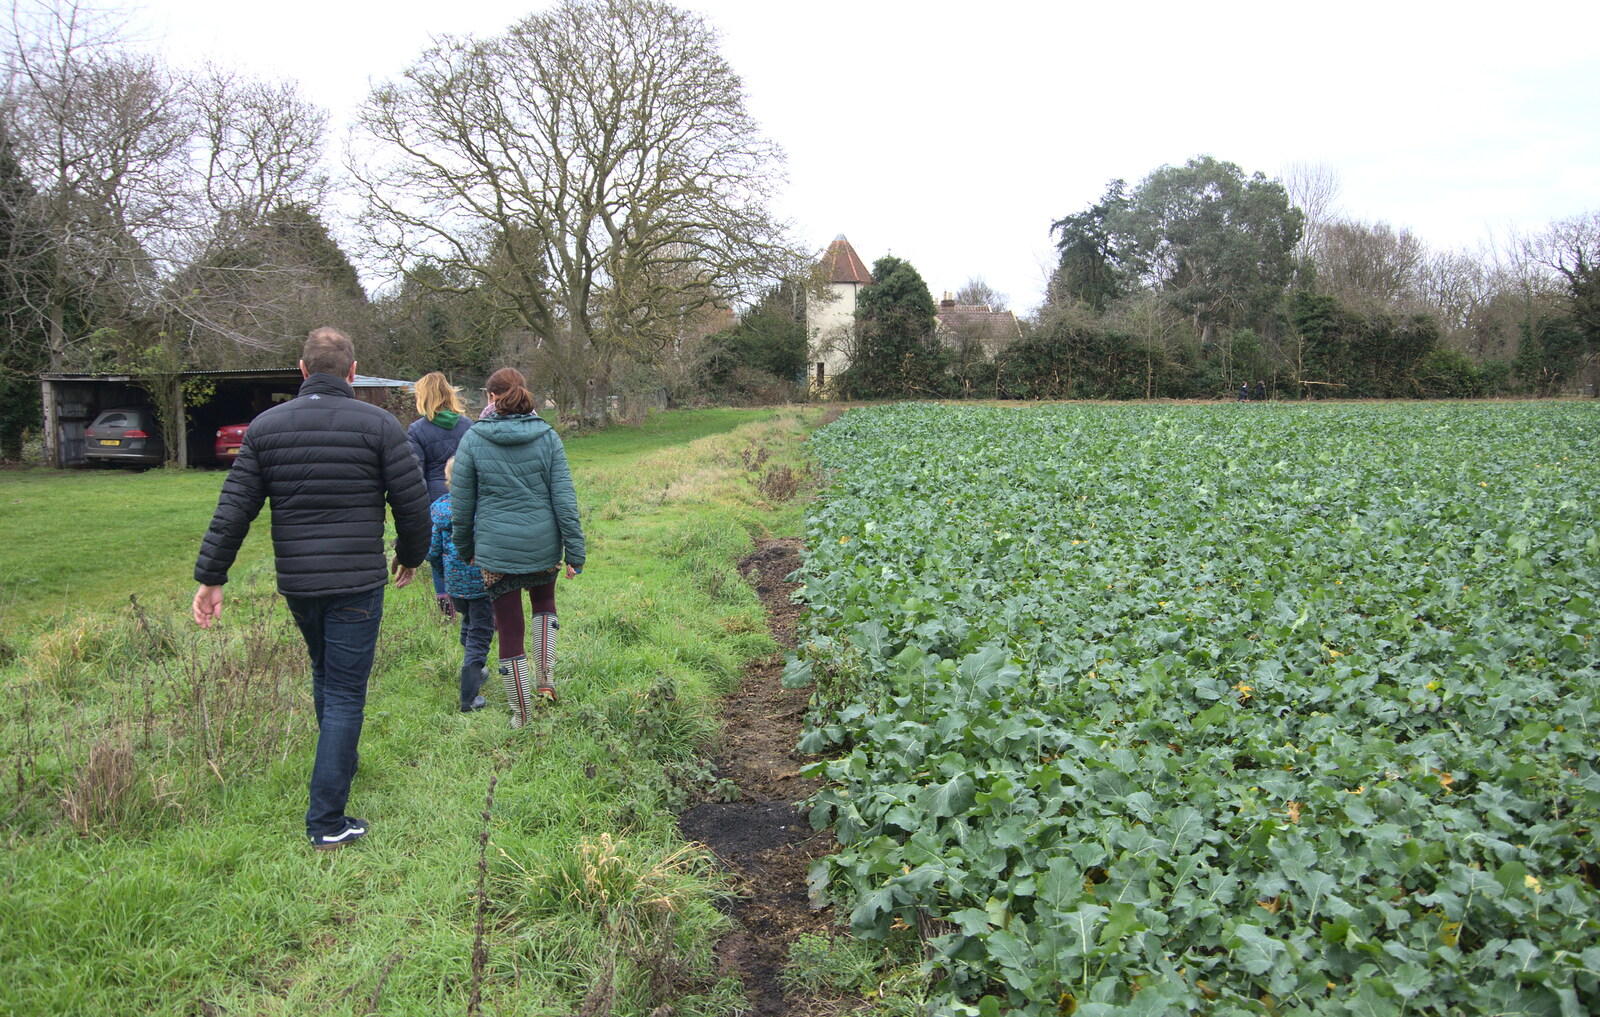 Janet and James head out for a walk up to the church from New Year's Eve and Day, Brome, Suffolk - 1st January 2019